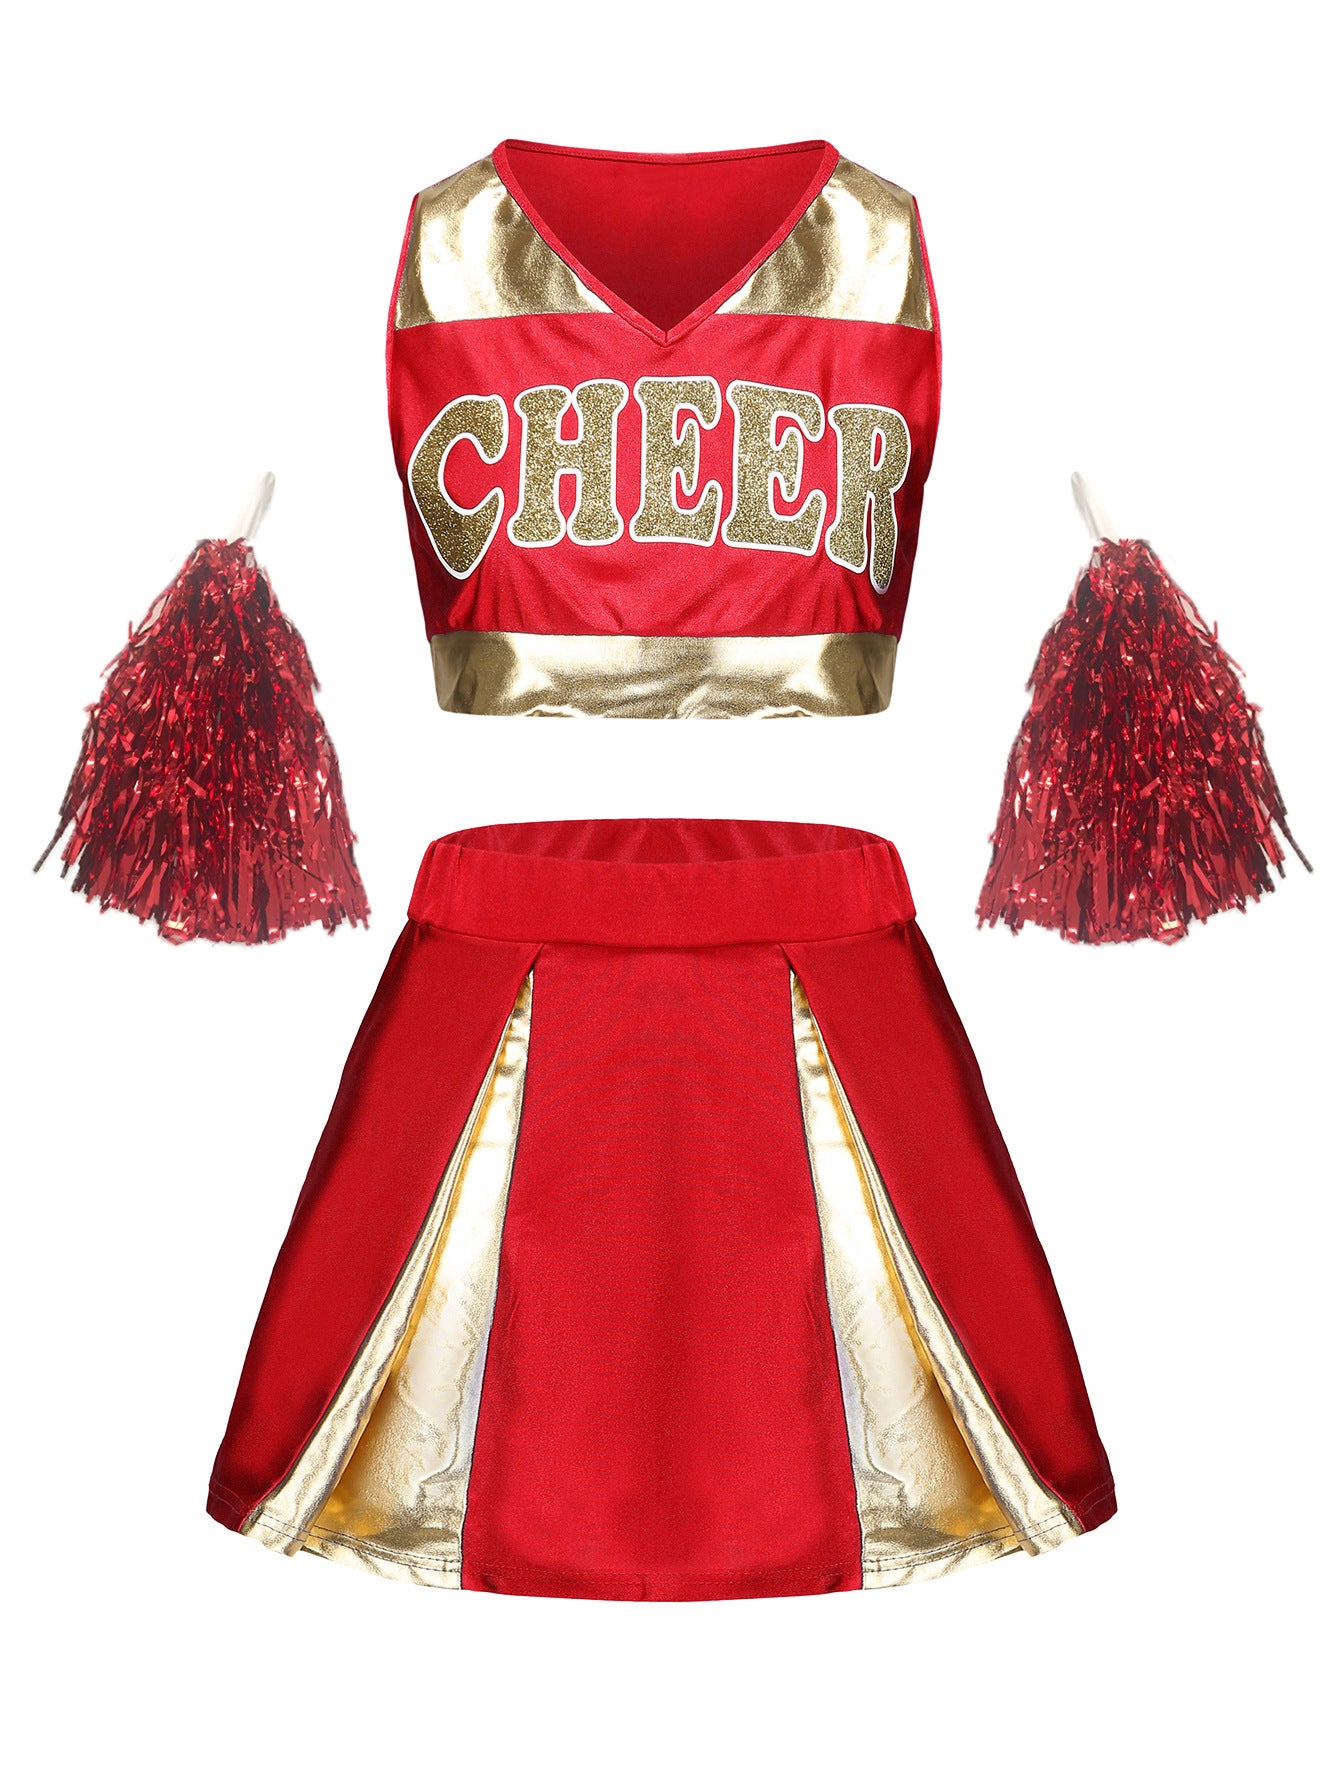 Women's Cheerleading Dance Performance Competition Printing Stitching Costumes